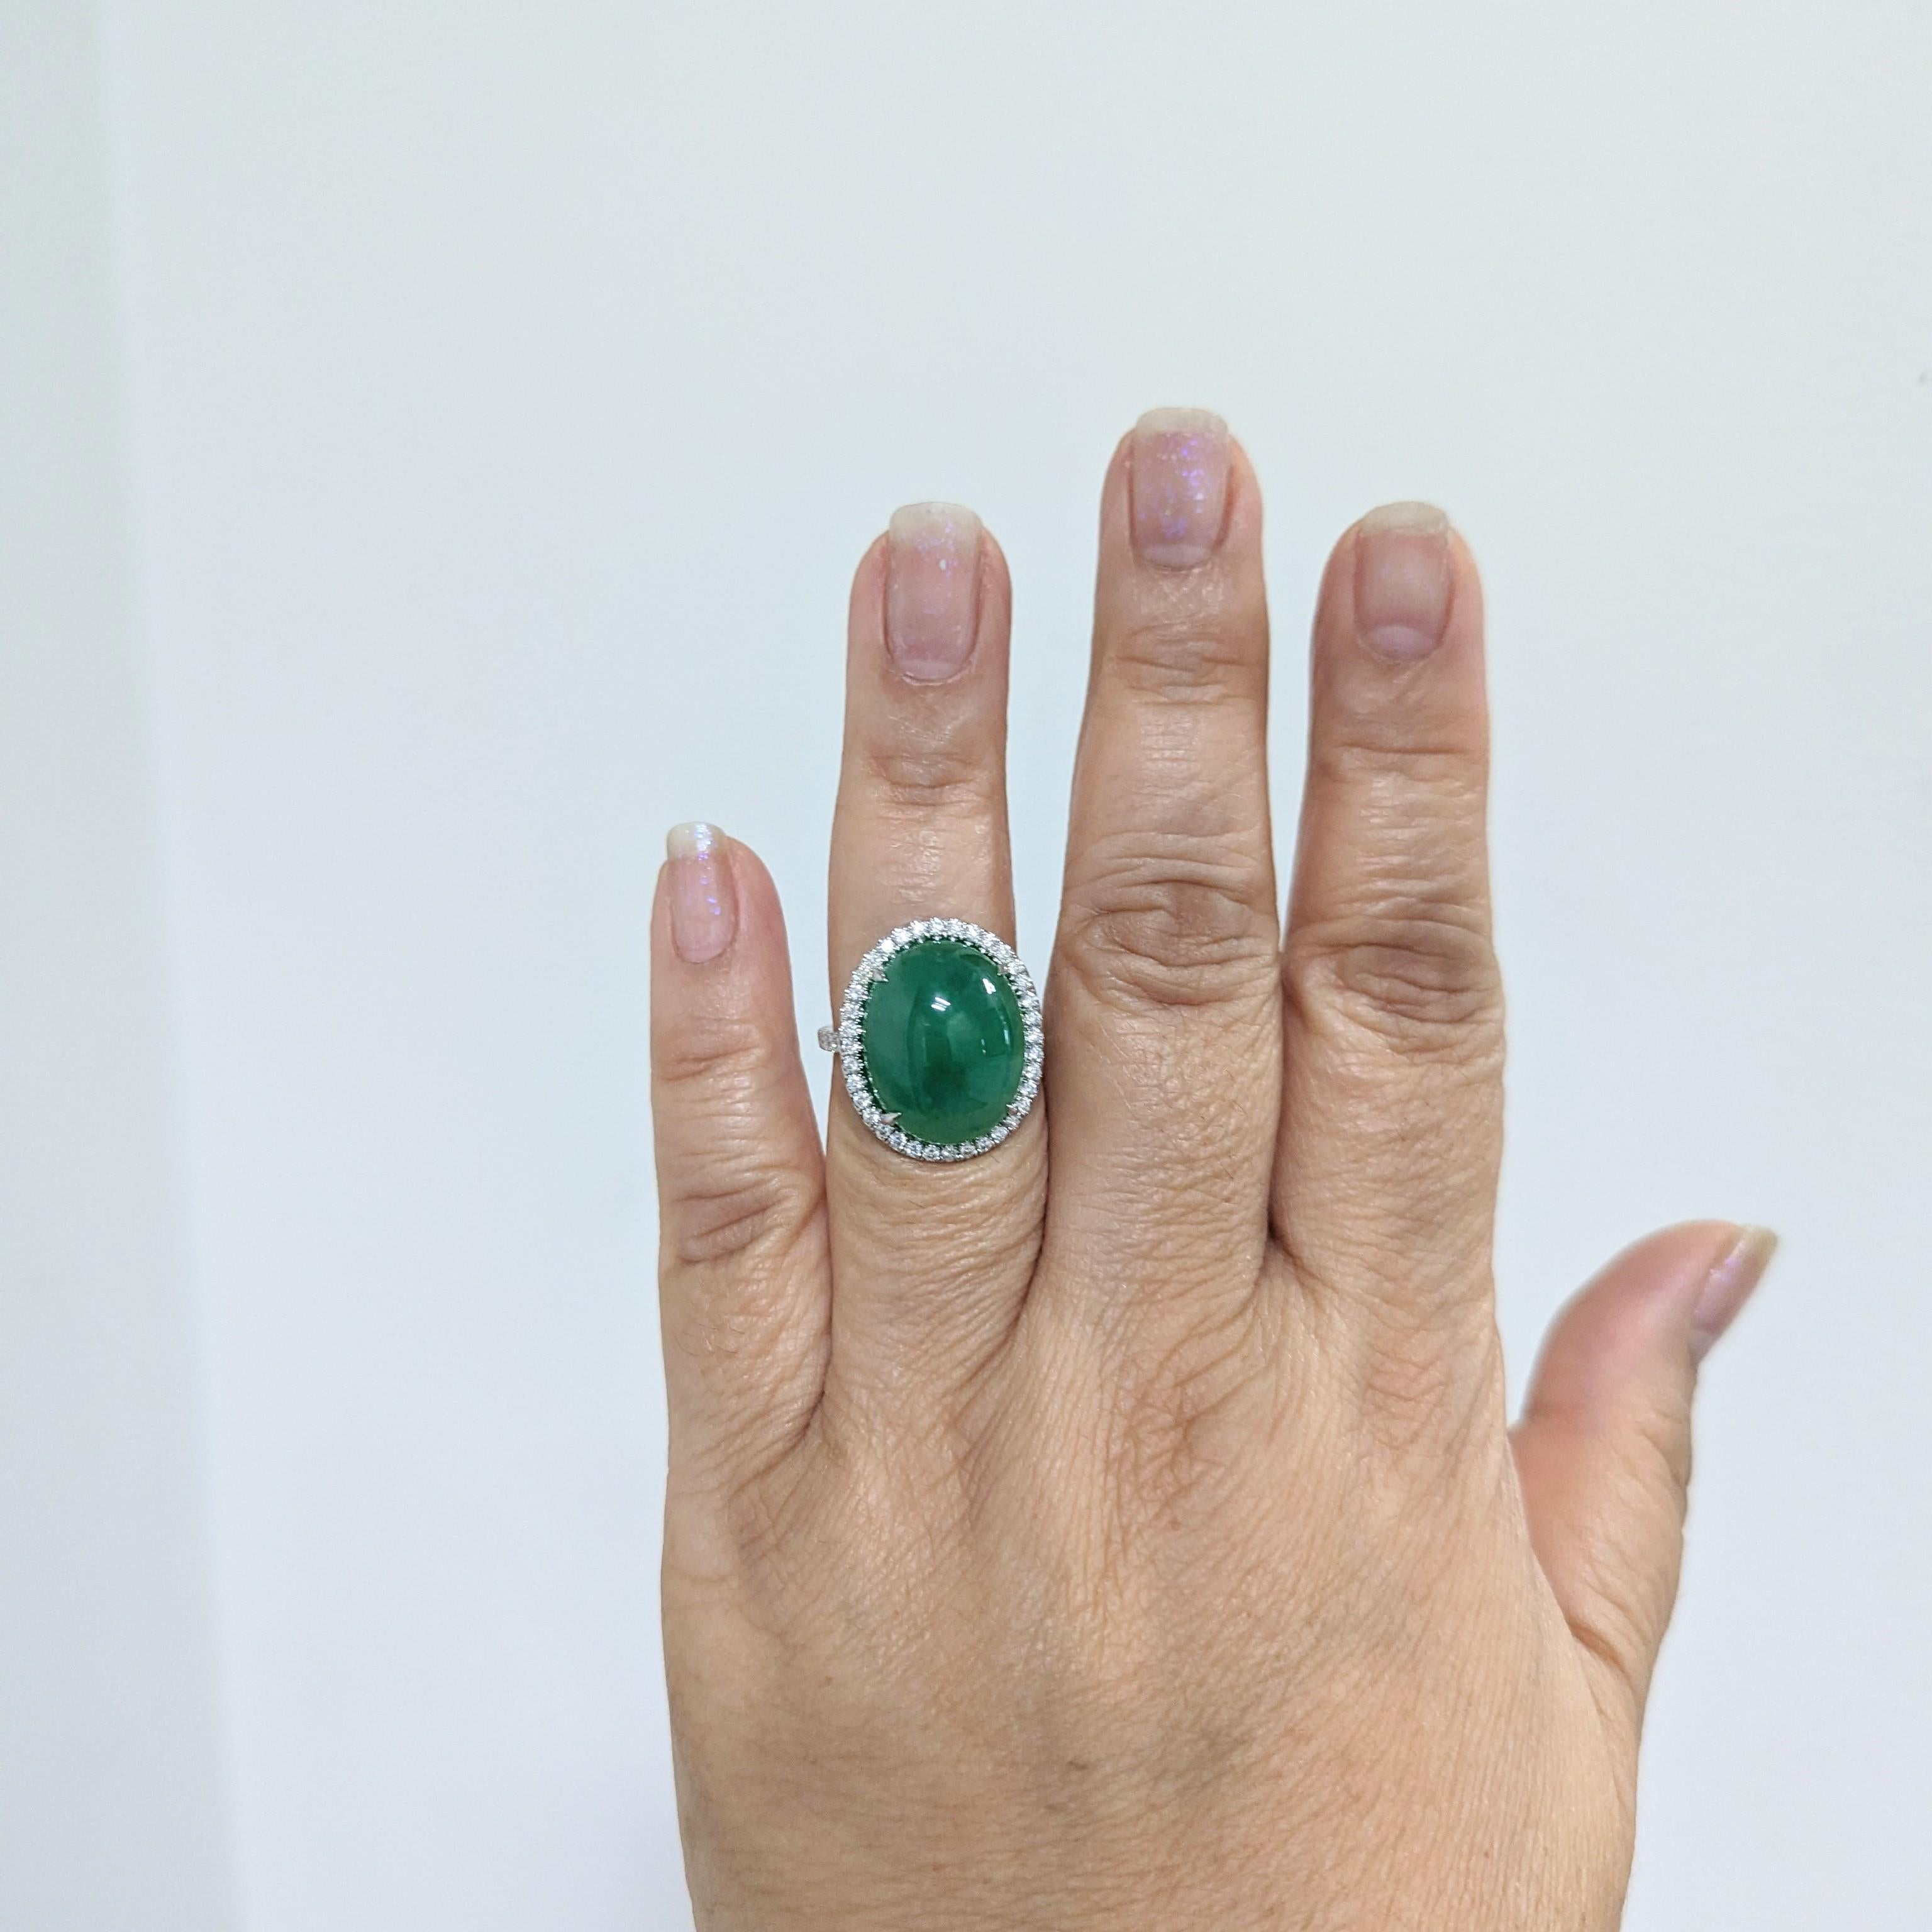 Beautiful 21.80 ct. GIA green jadeite oval cabochon with 0.75 ct. good quality white diamond rounds.  Handmade in platinum.  Ring size 7.25.